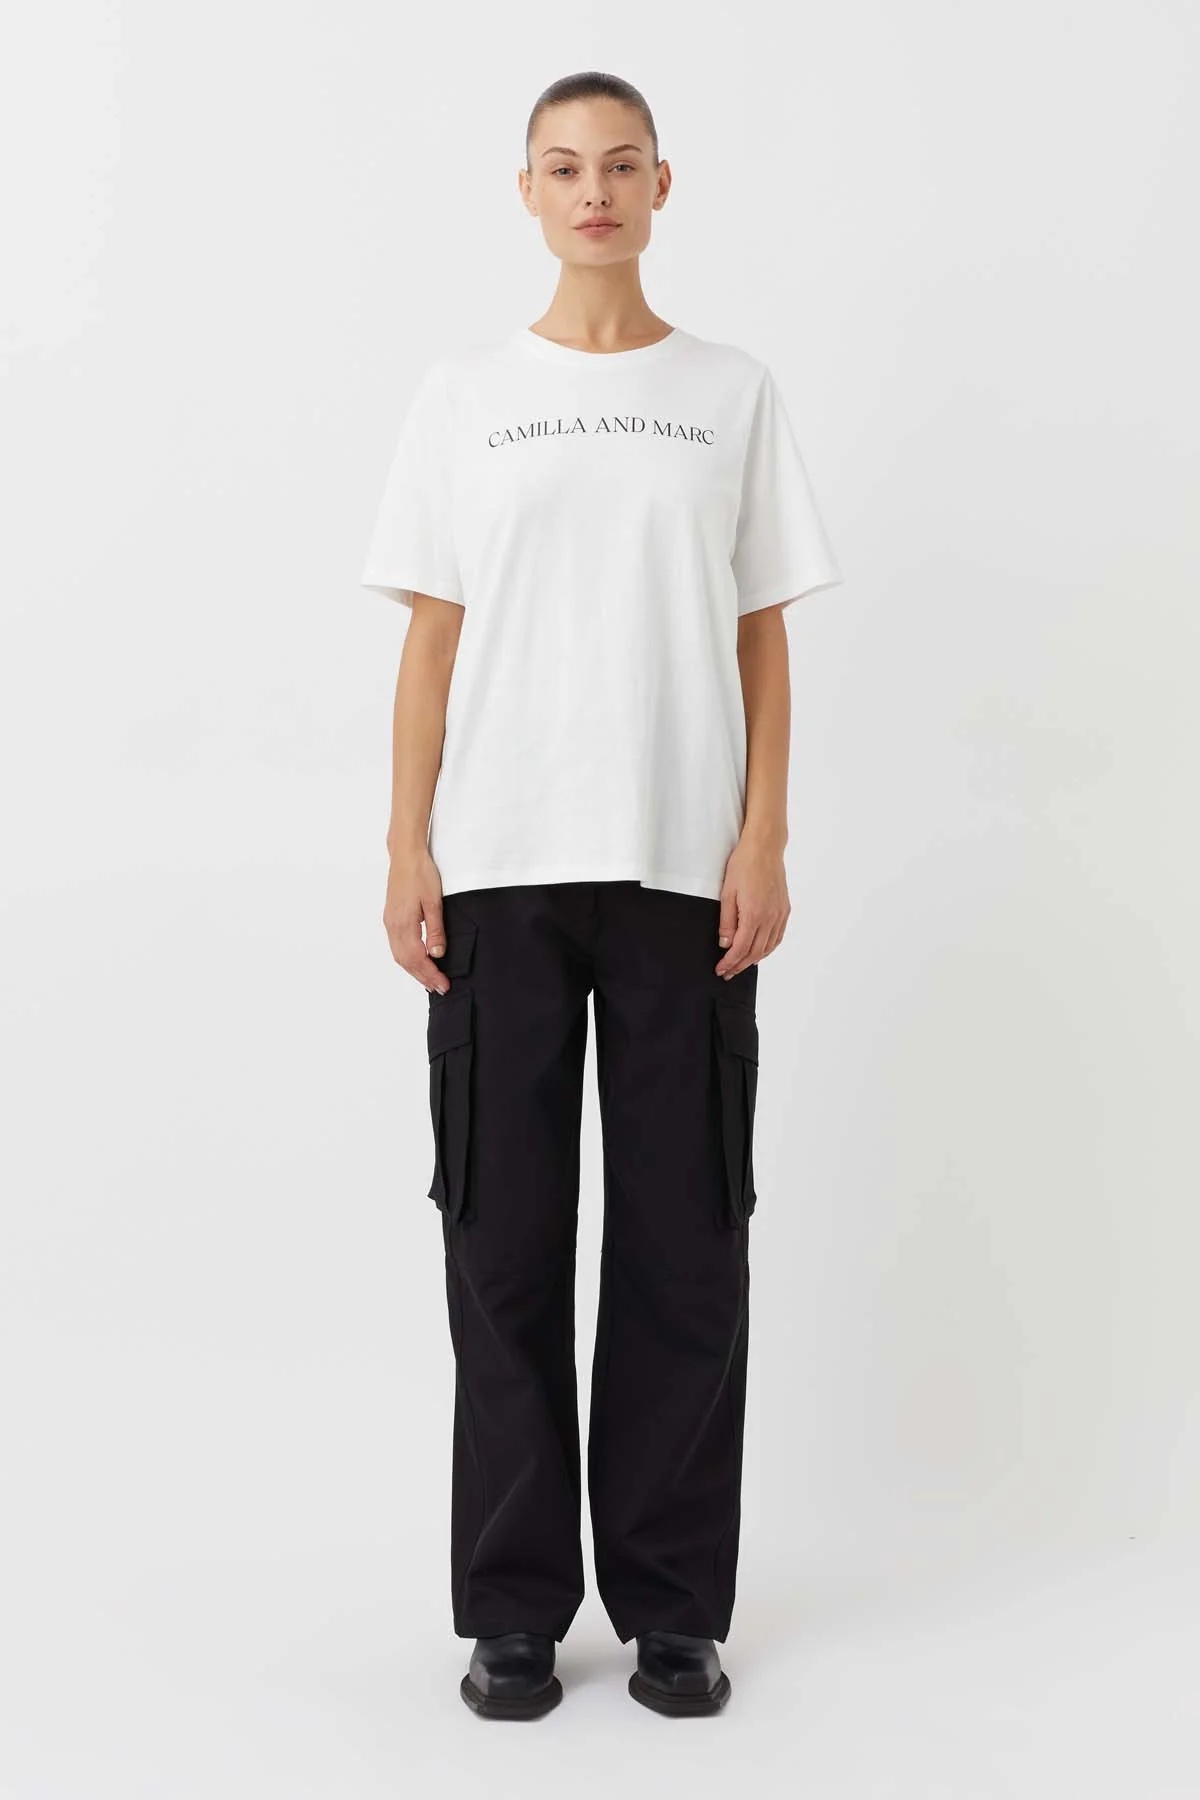 C&M CAMILLA AND MARC ASHER TEE - WHITE